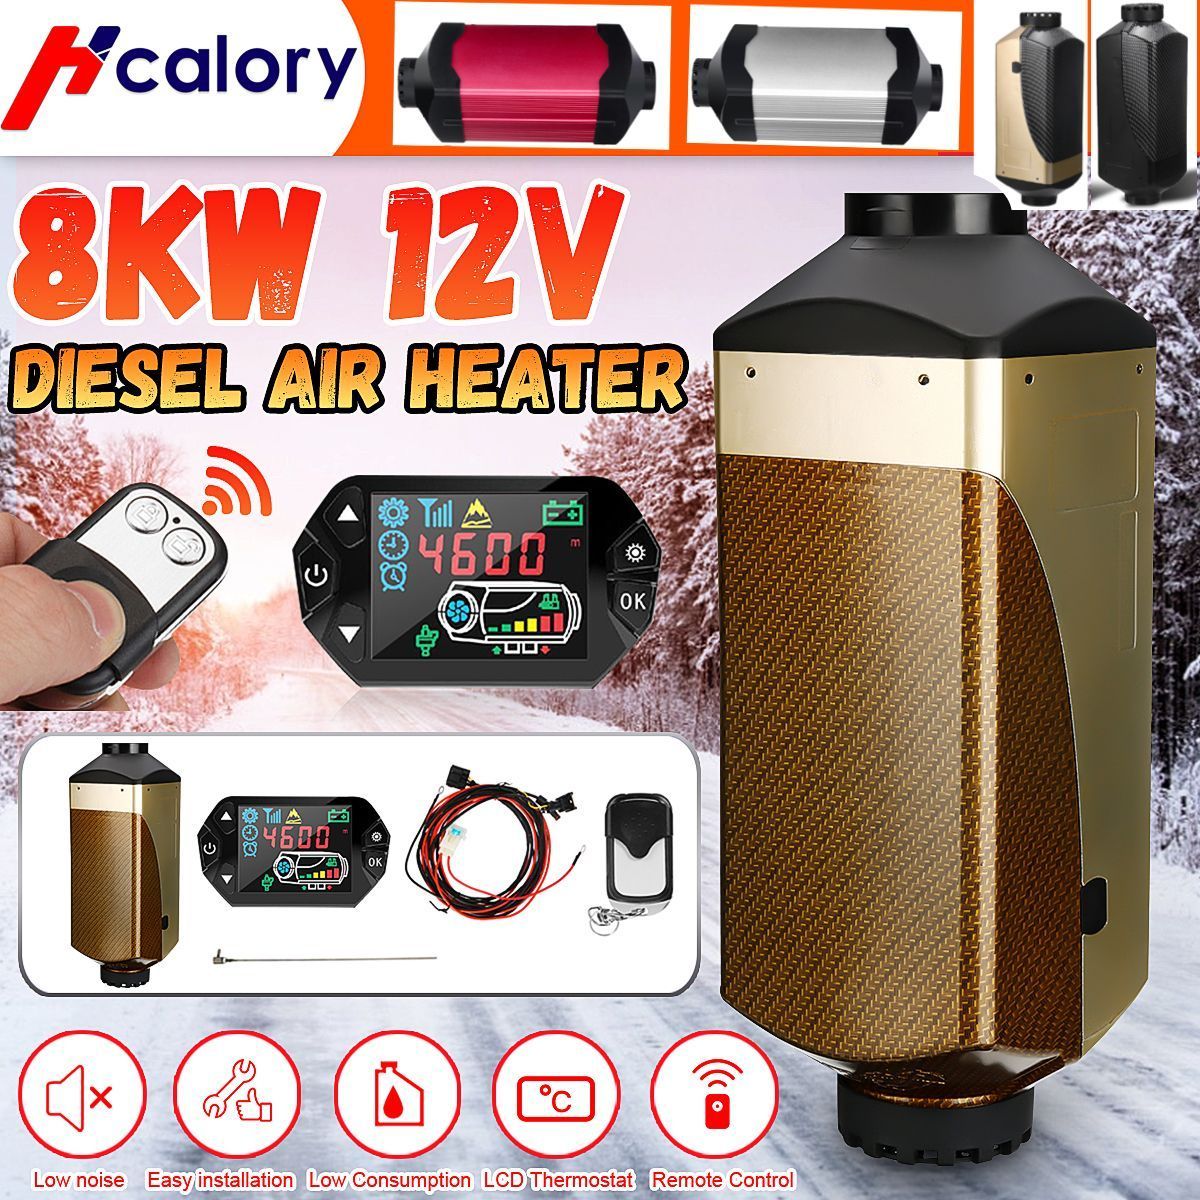 HCalory-12V-8KW-Parking-Diesel-Air-Heater-Compact-Diamond-LCD-Switch-With-One-way-Small-Remote-Contr-1595431